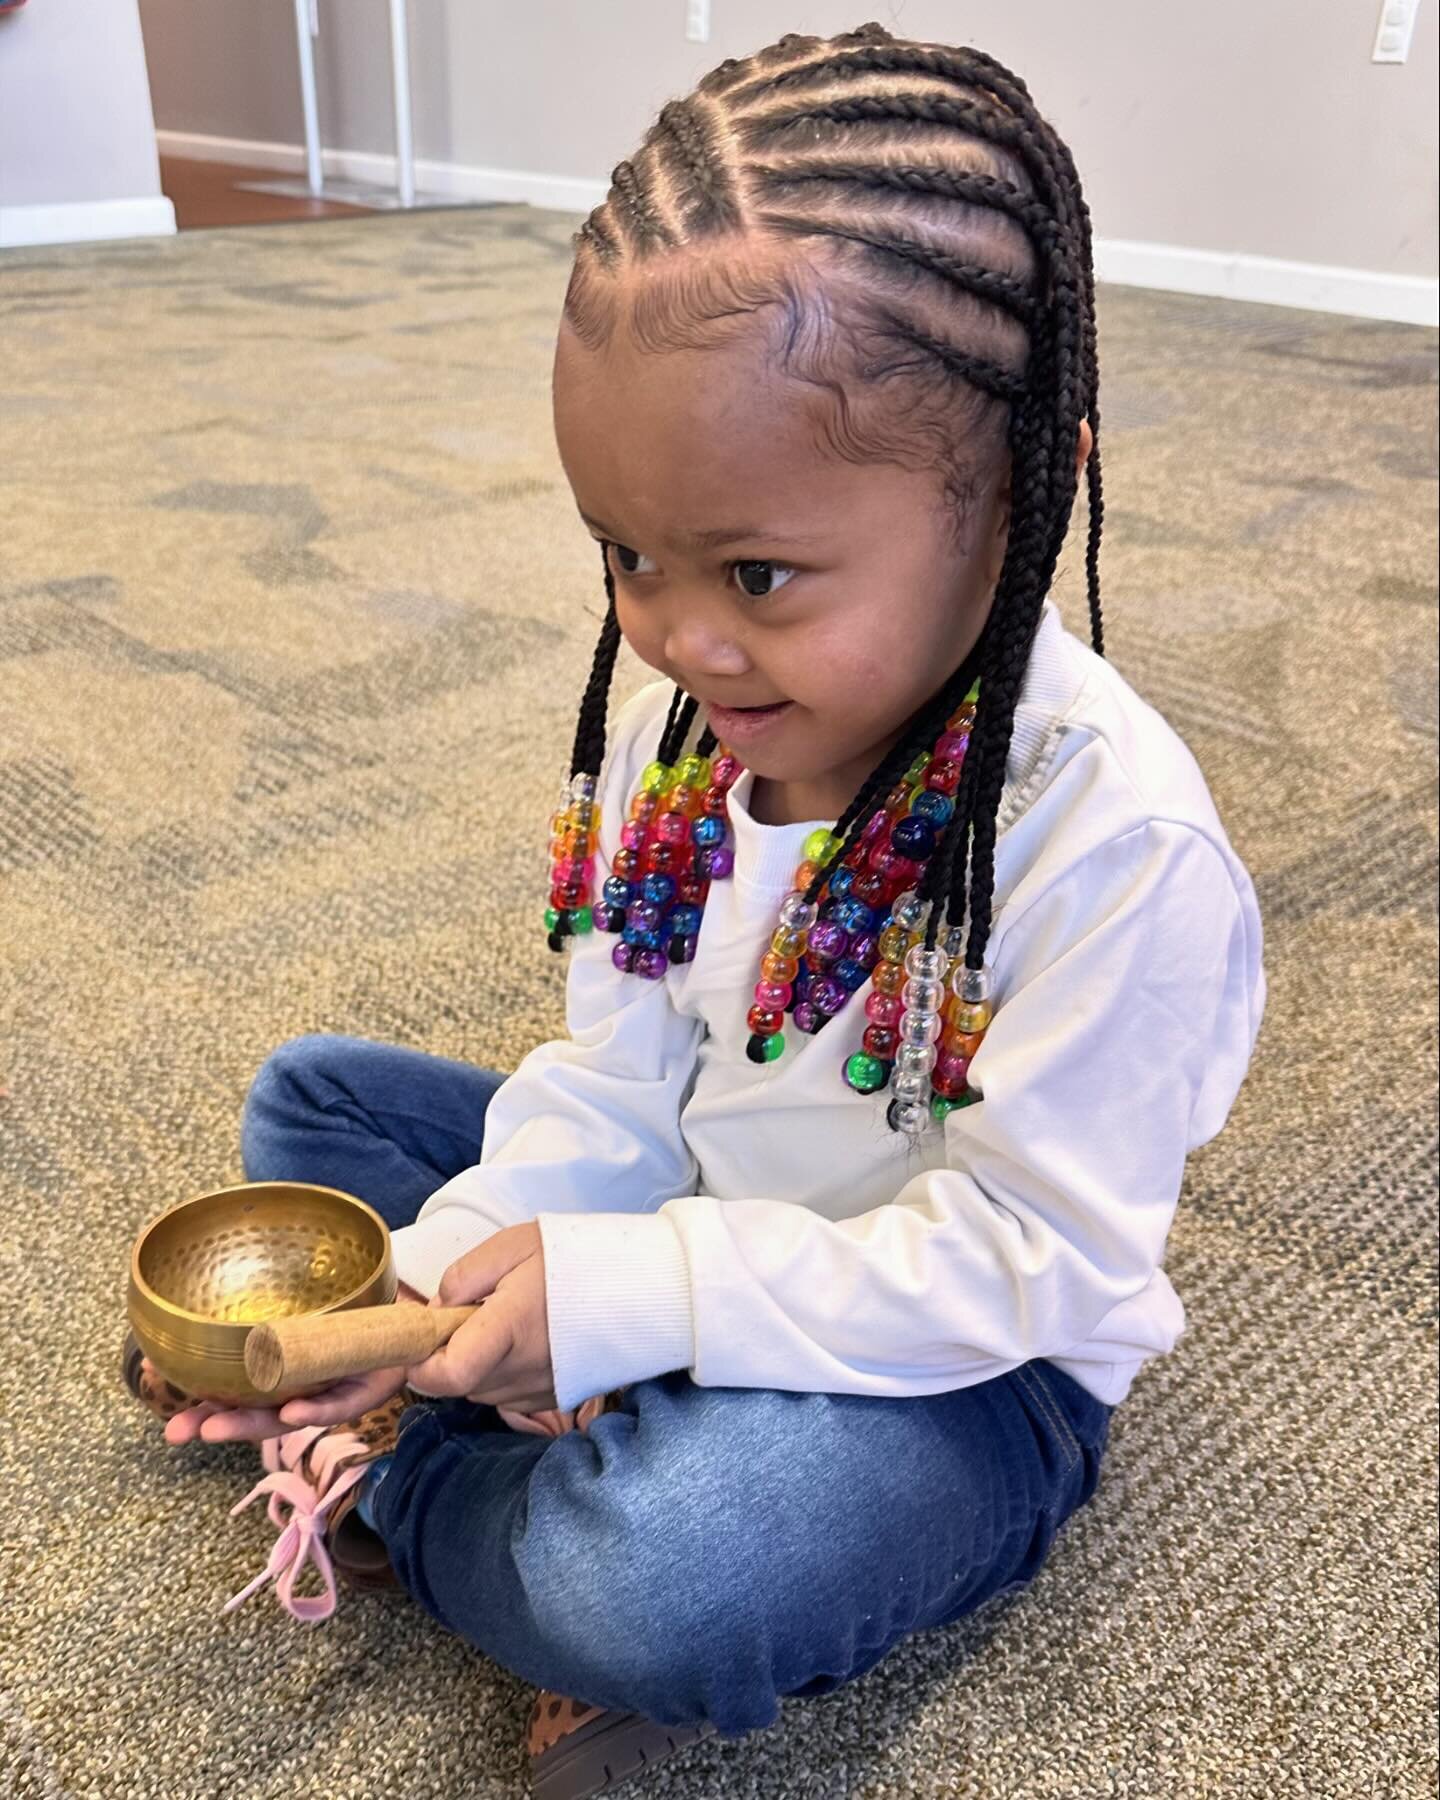 I call this series, &ldquo;Sweeties &amp; Singing Bowls&rdquo; 💕

Singing bowls are mesmerizing 💫 

We build up to this skill in a number of ways: practicing waiting during passing games that move a bit faster (pass the quiet, taking turns with the